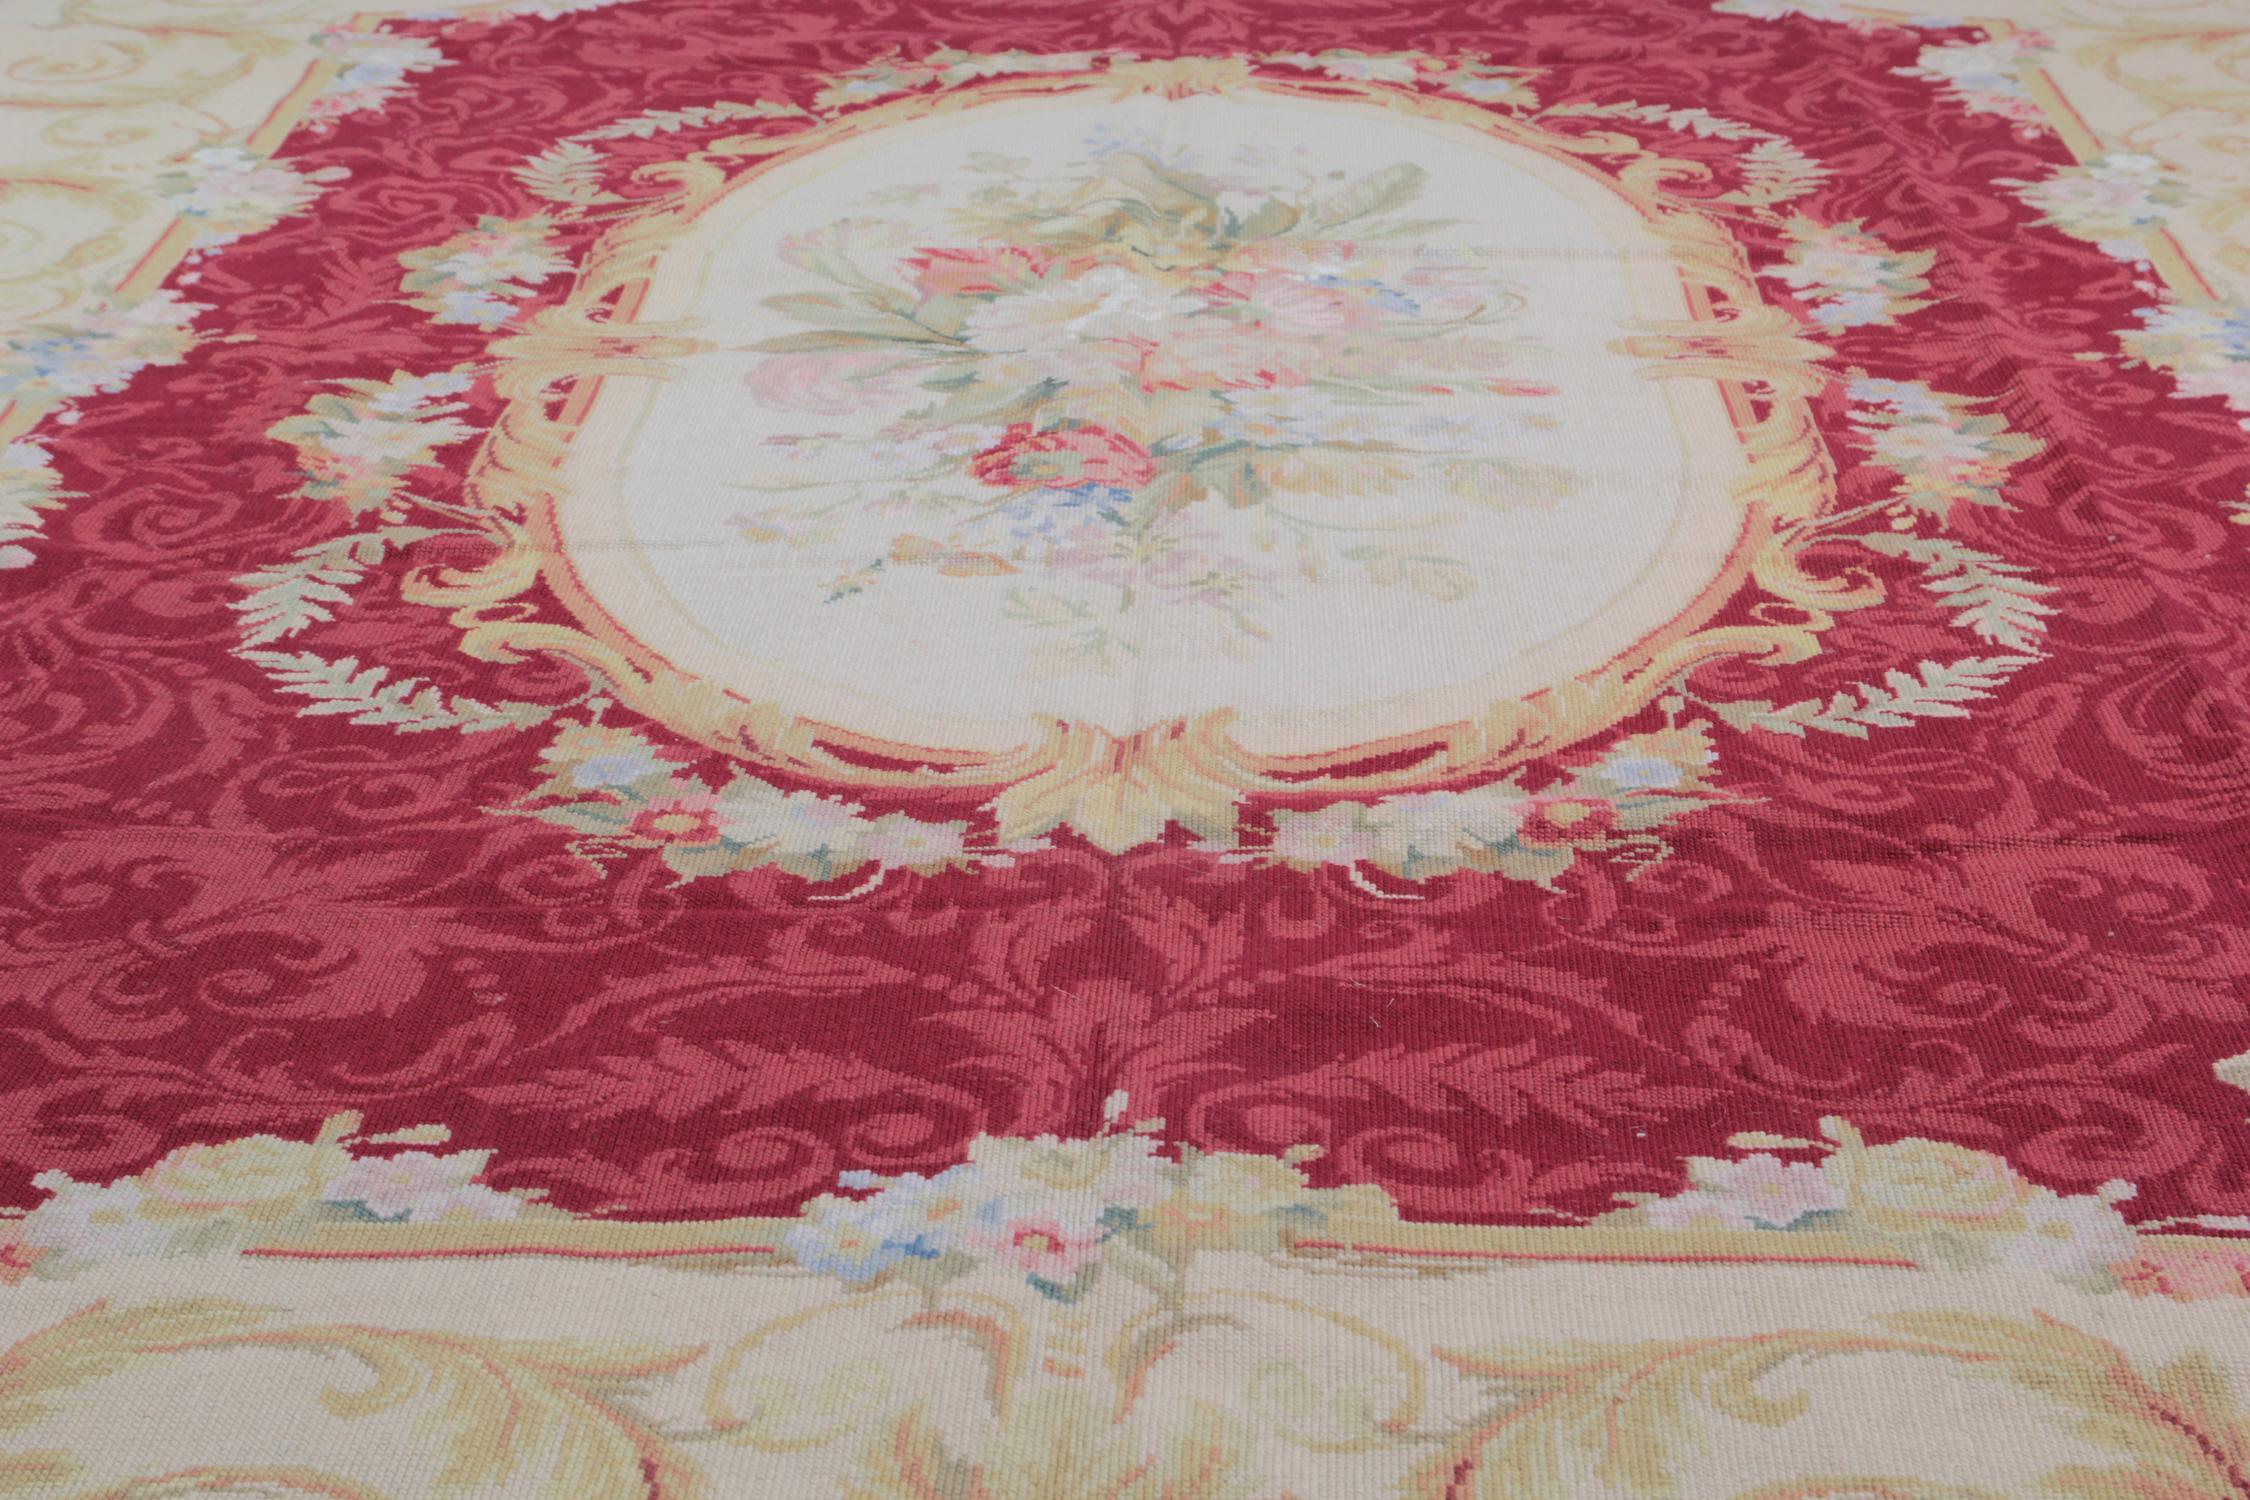 Hand-Woven Vintage Aubusson Style Needlepoint Rug, Handmade Carpet Tapestry Wall Hanging